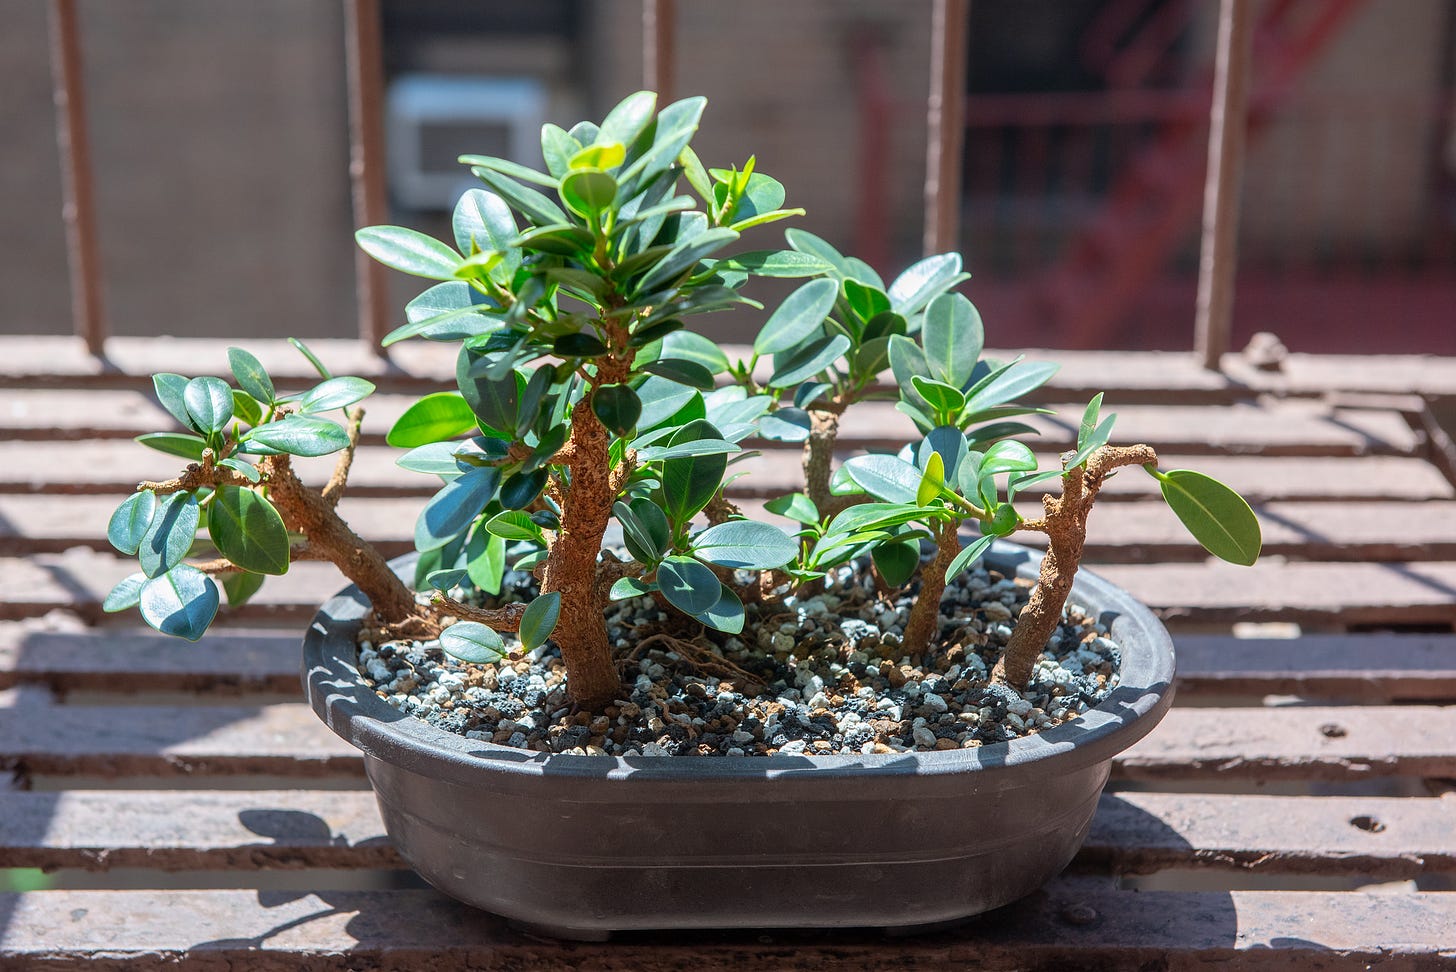 ID: Ficus forest bonsai planting in a new oval pot